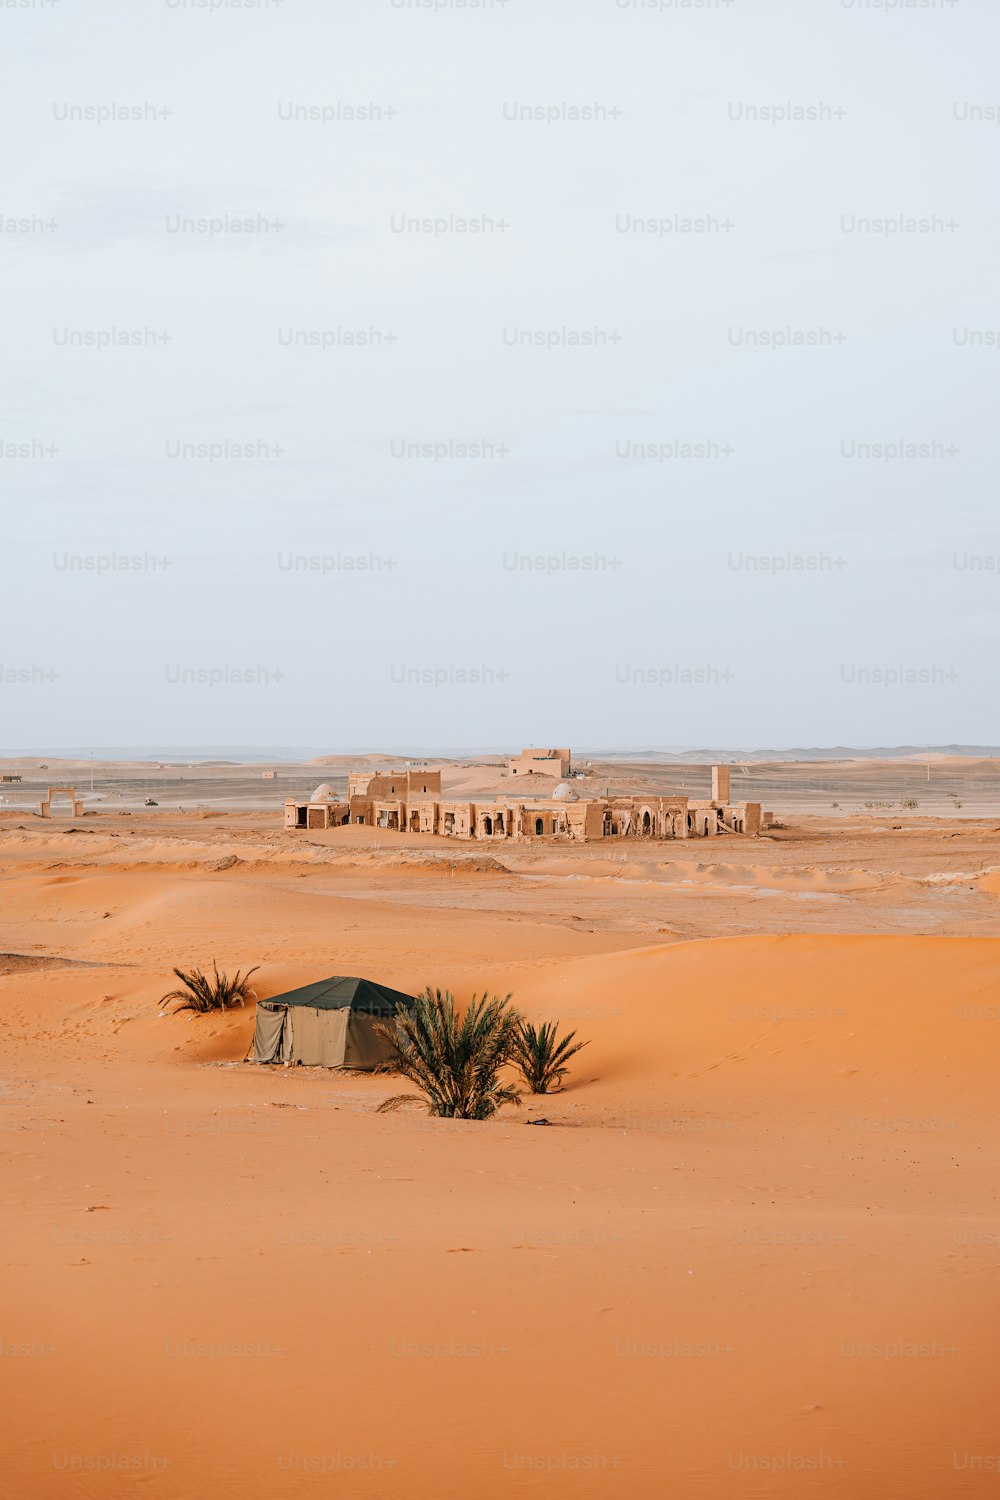 a small hut in the middle of a desert